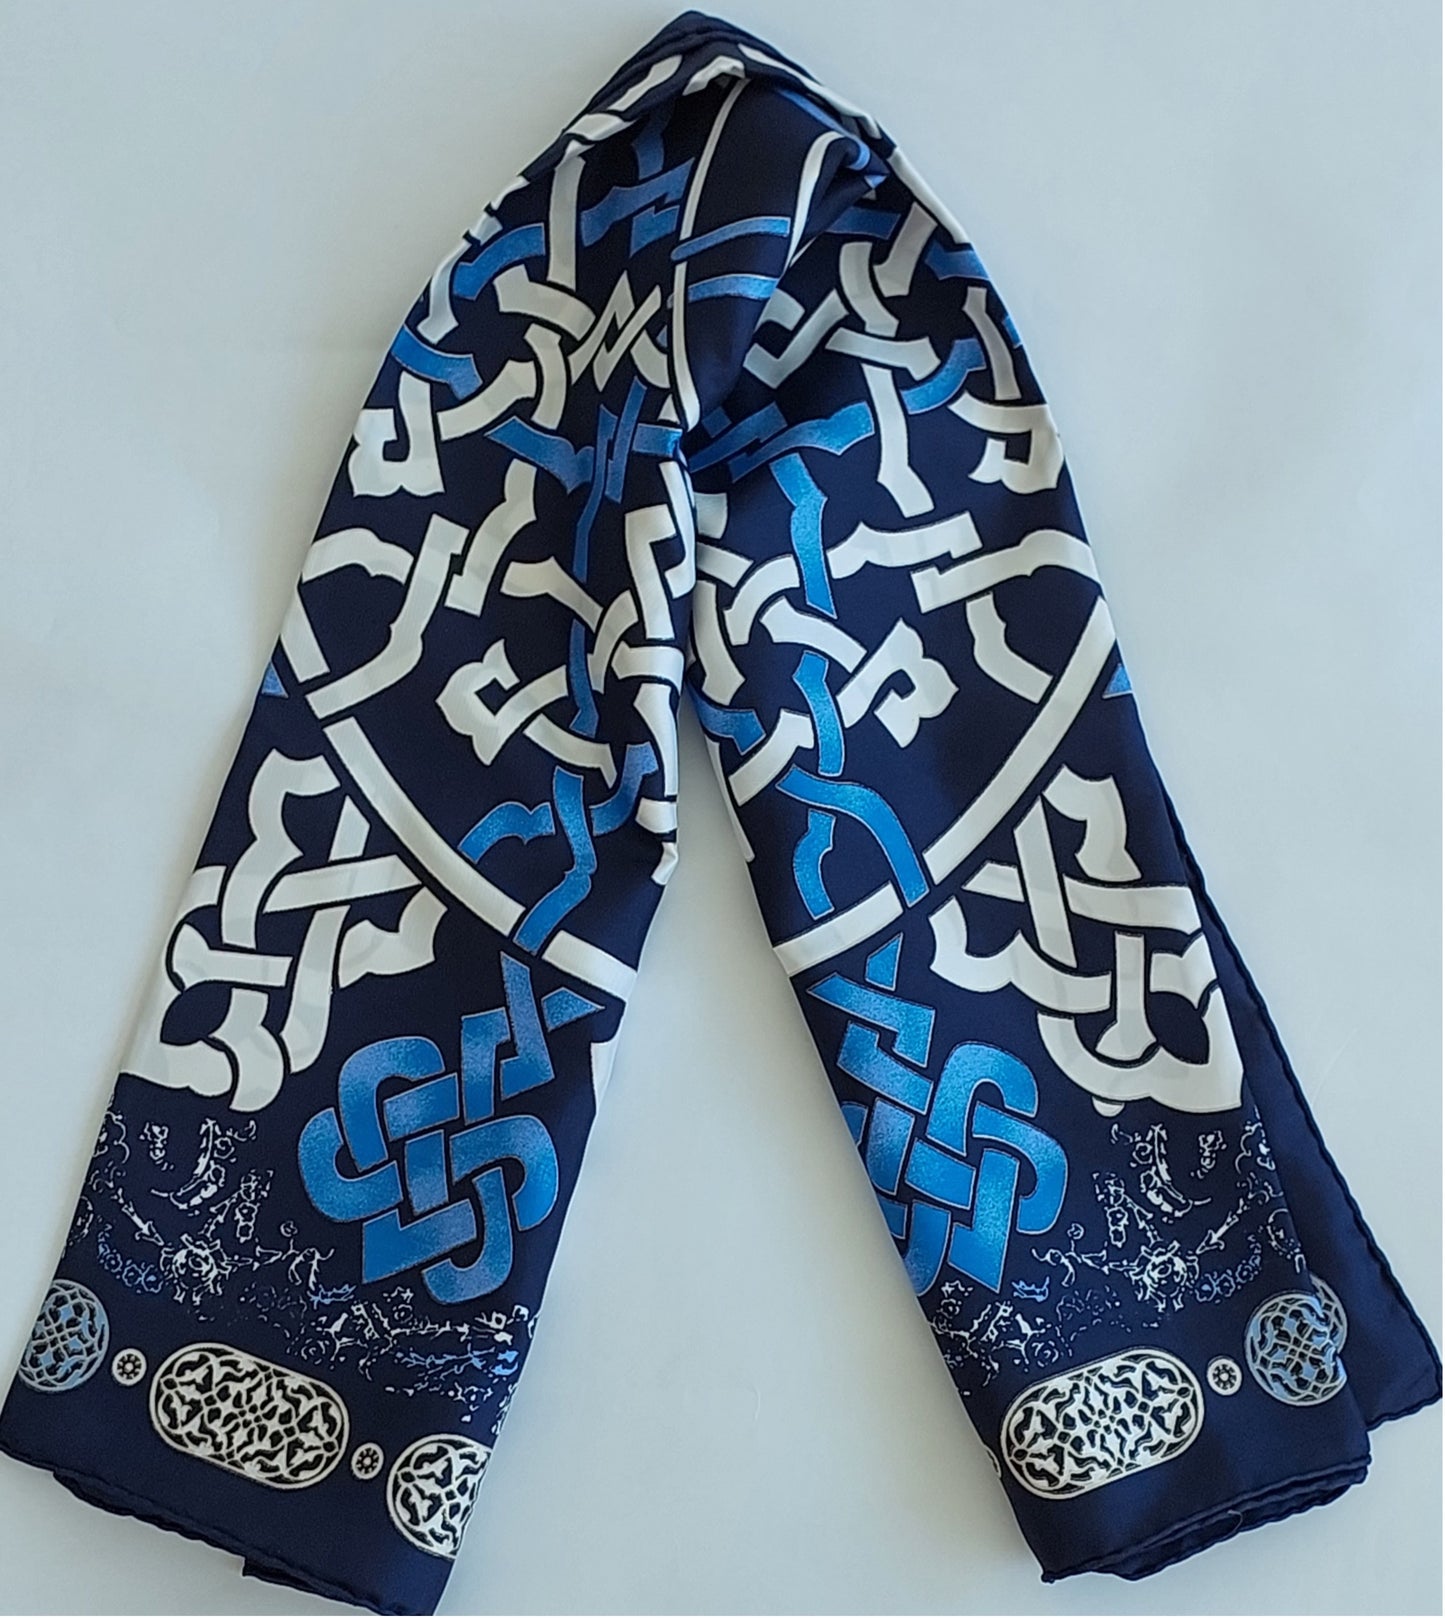 Woman 100% Silk Scarf Geometric design Blue White Navy Blue Colors Hand rolled stitch Great Gift for her in a beautiful box